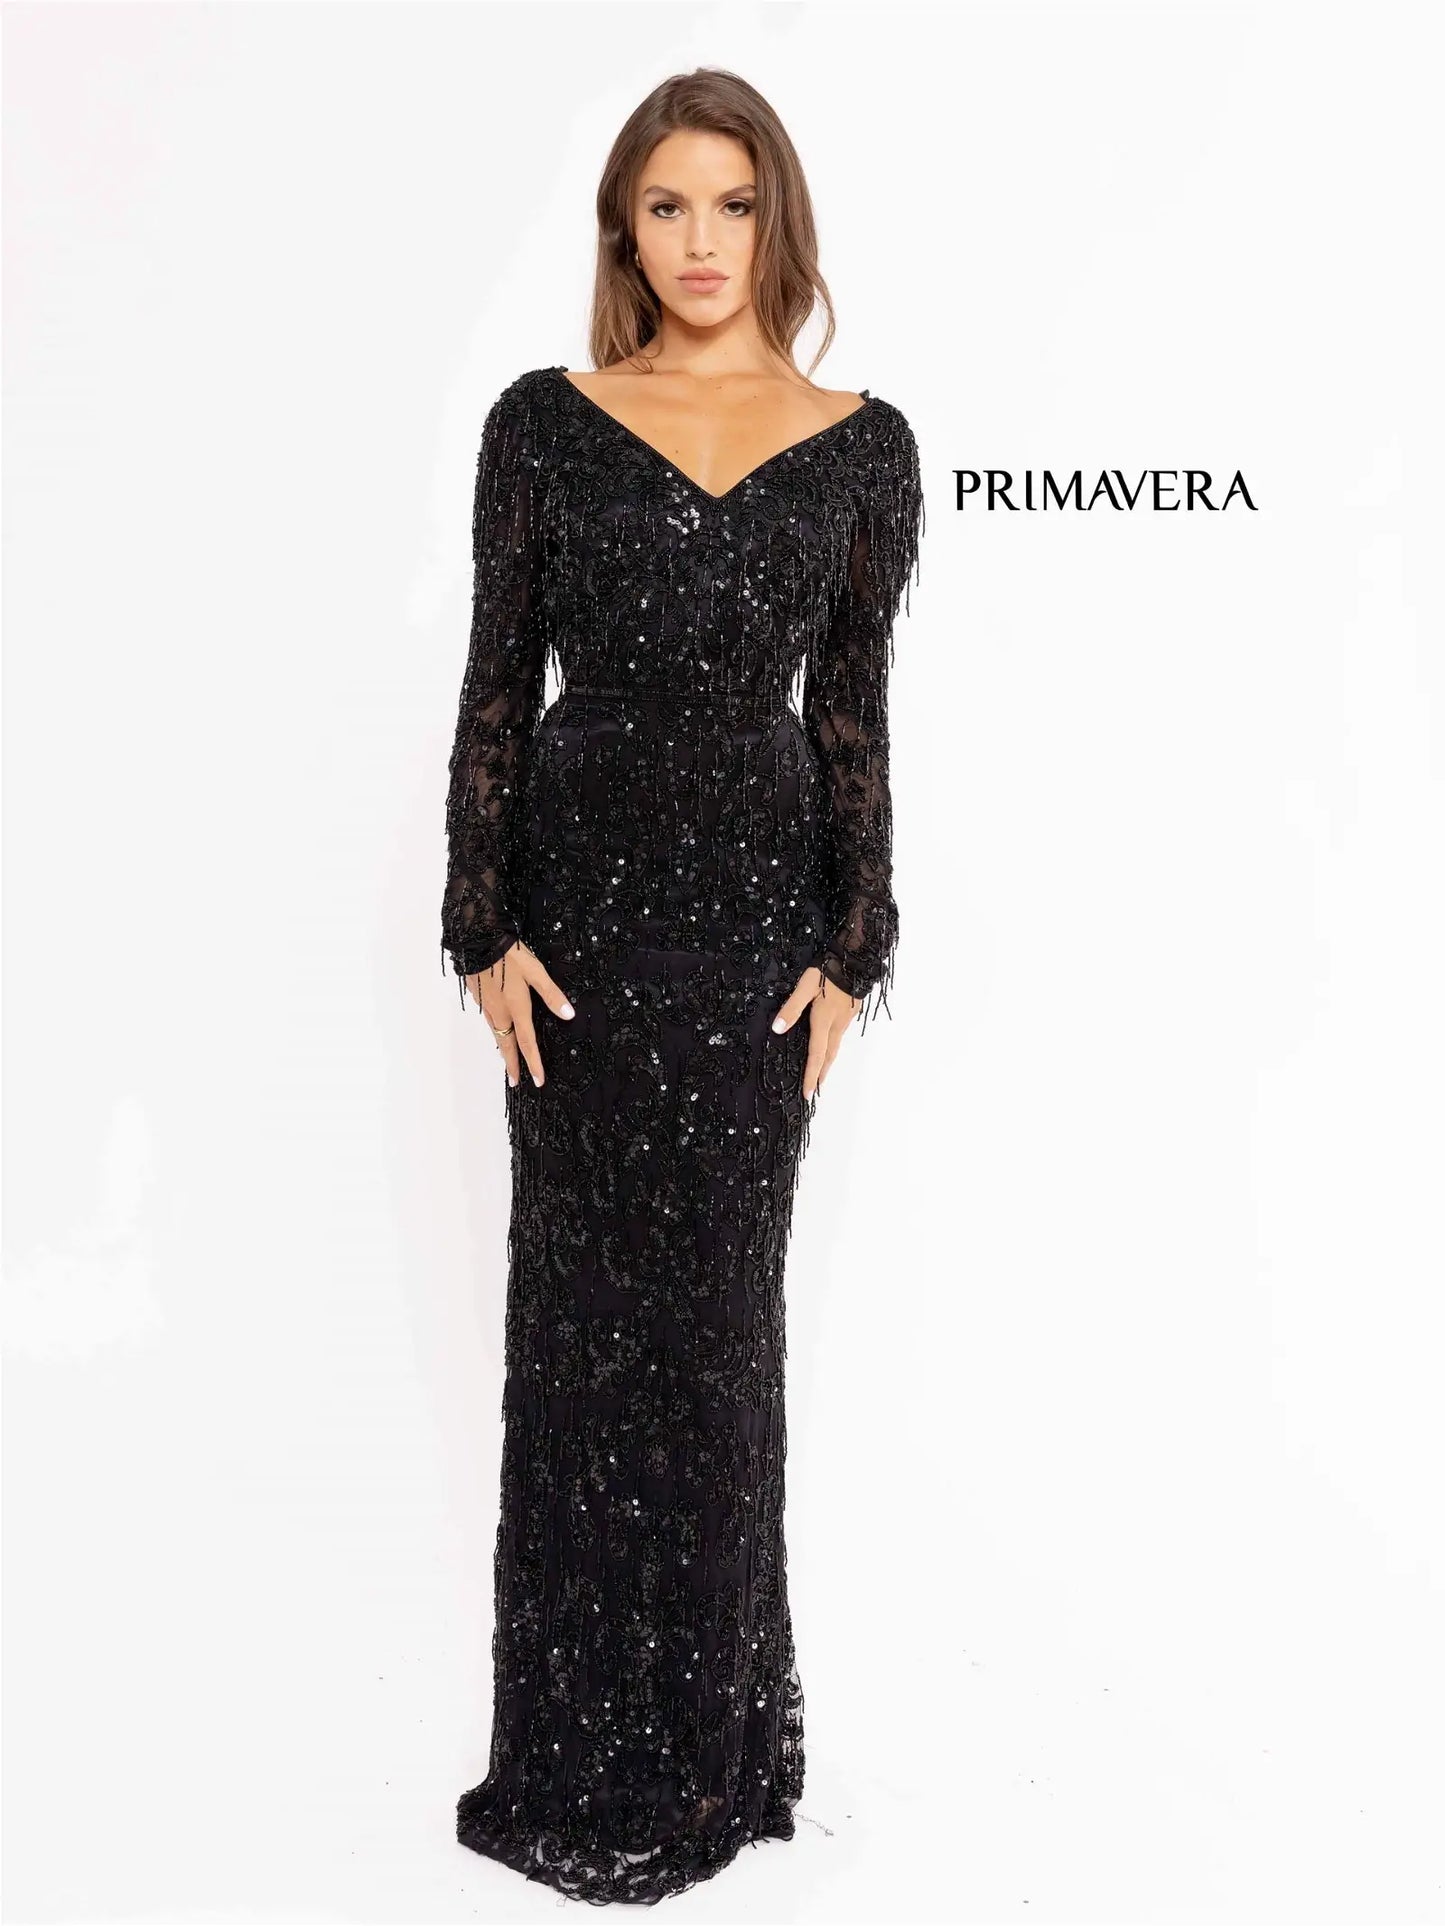 Primavera Couture 3954 Prom Dress Long Beaded Gown